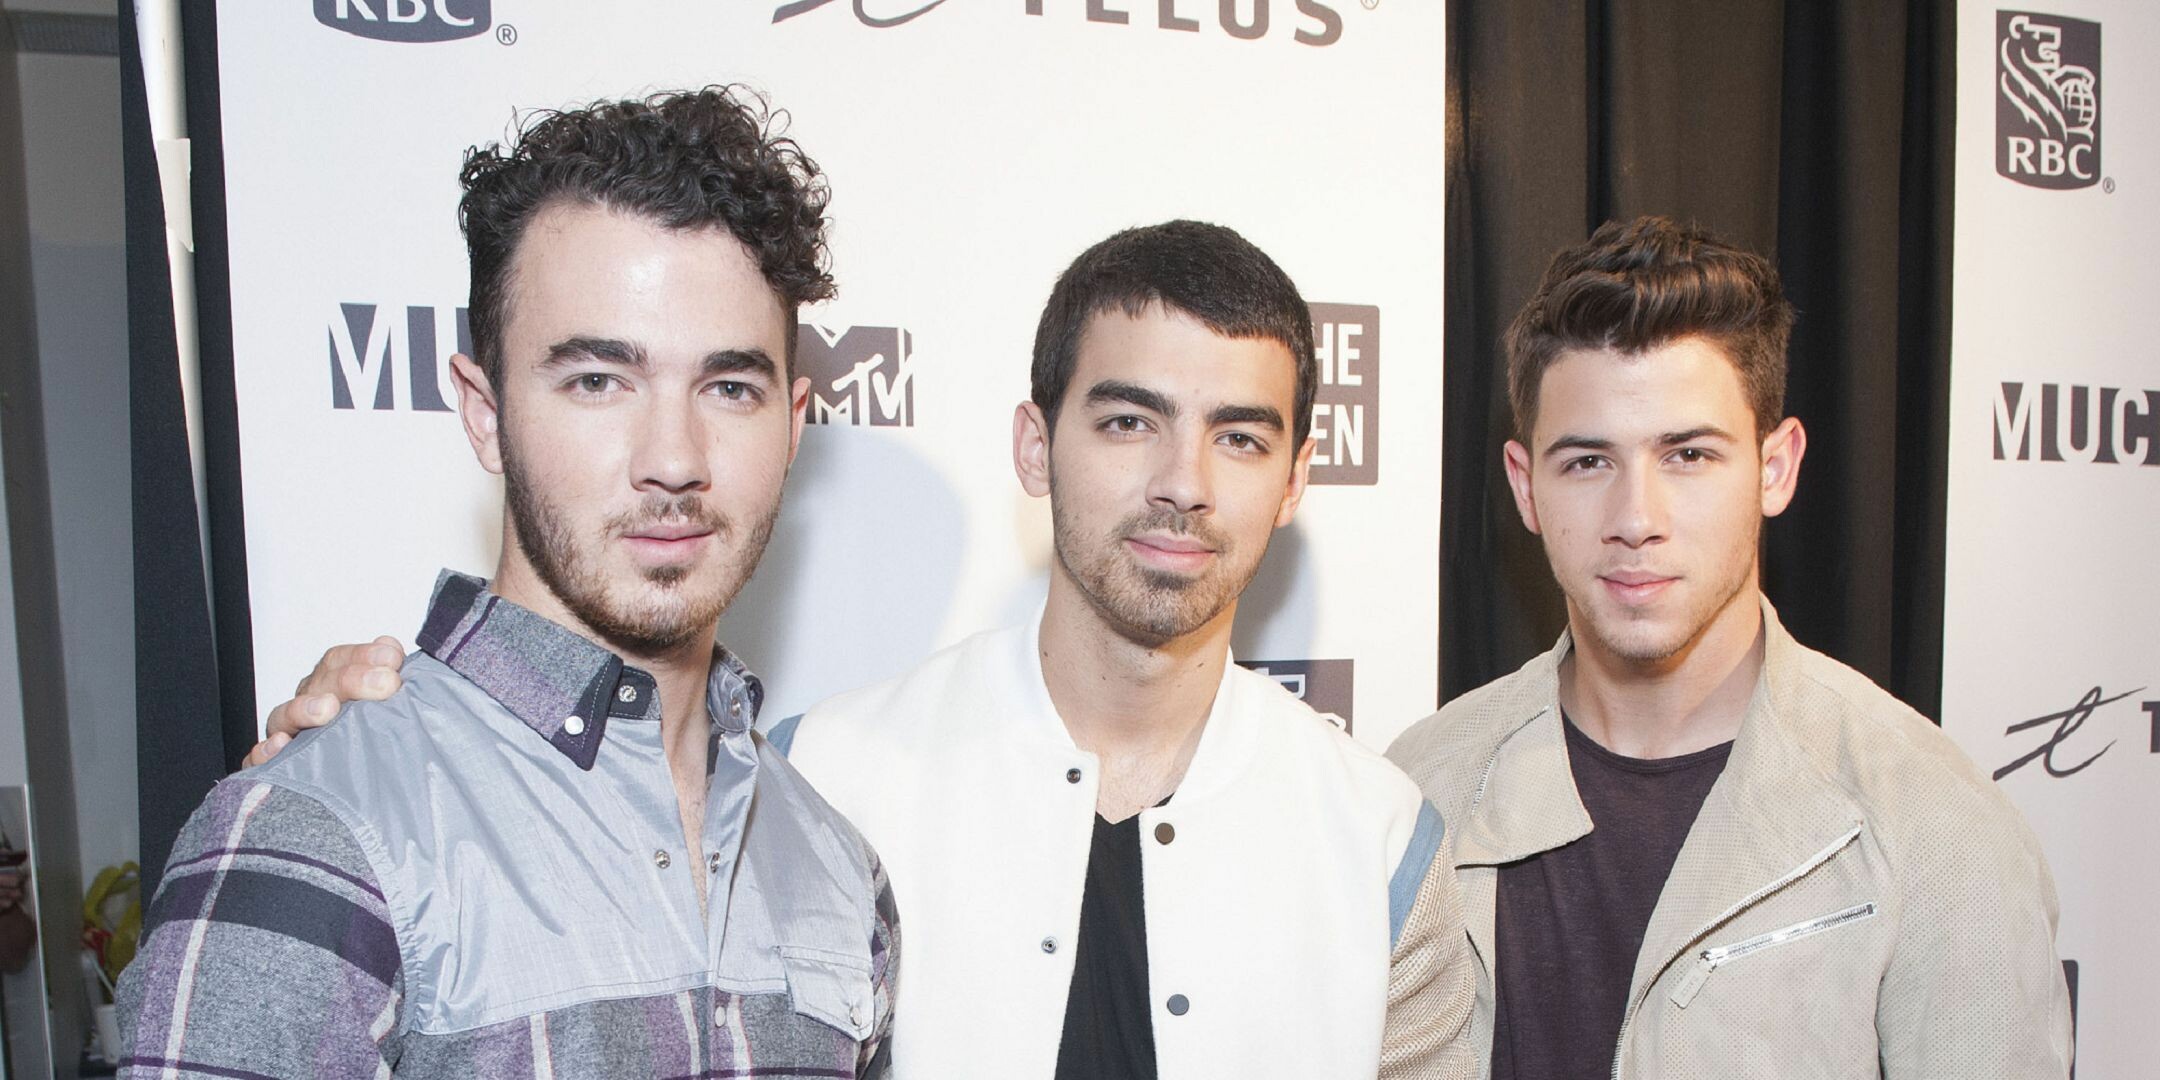 Jonas Brothers: The band co-hosted and performed at the 2009 MuchMusic Video Awards. 2160x1080 Dual Screen Wallpaper.